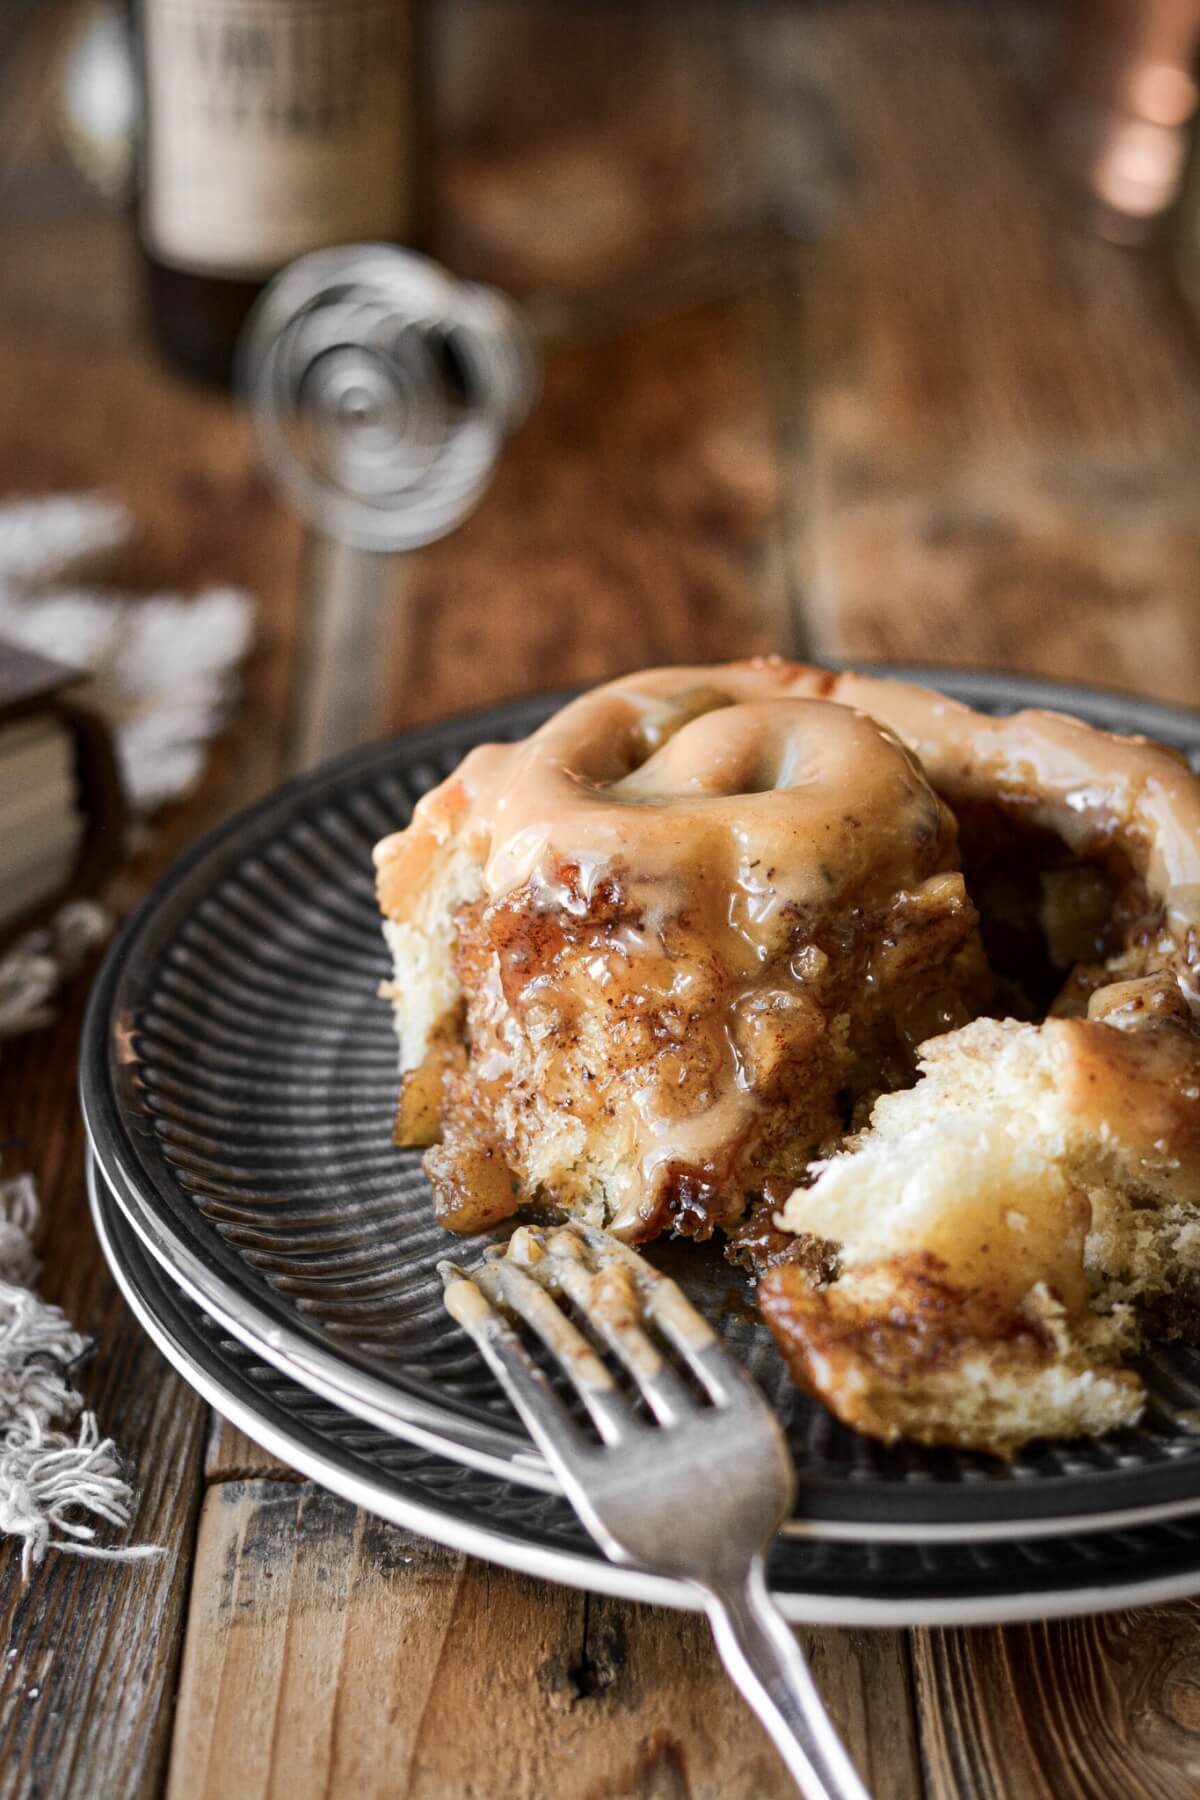 Apple pie cinnamon roll unrolled to show the filling inside.